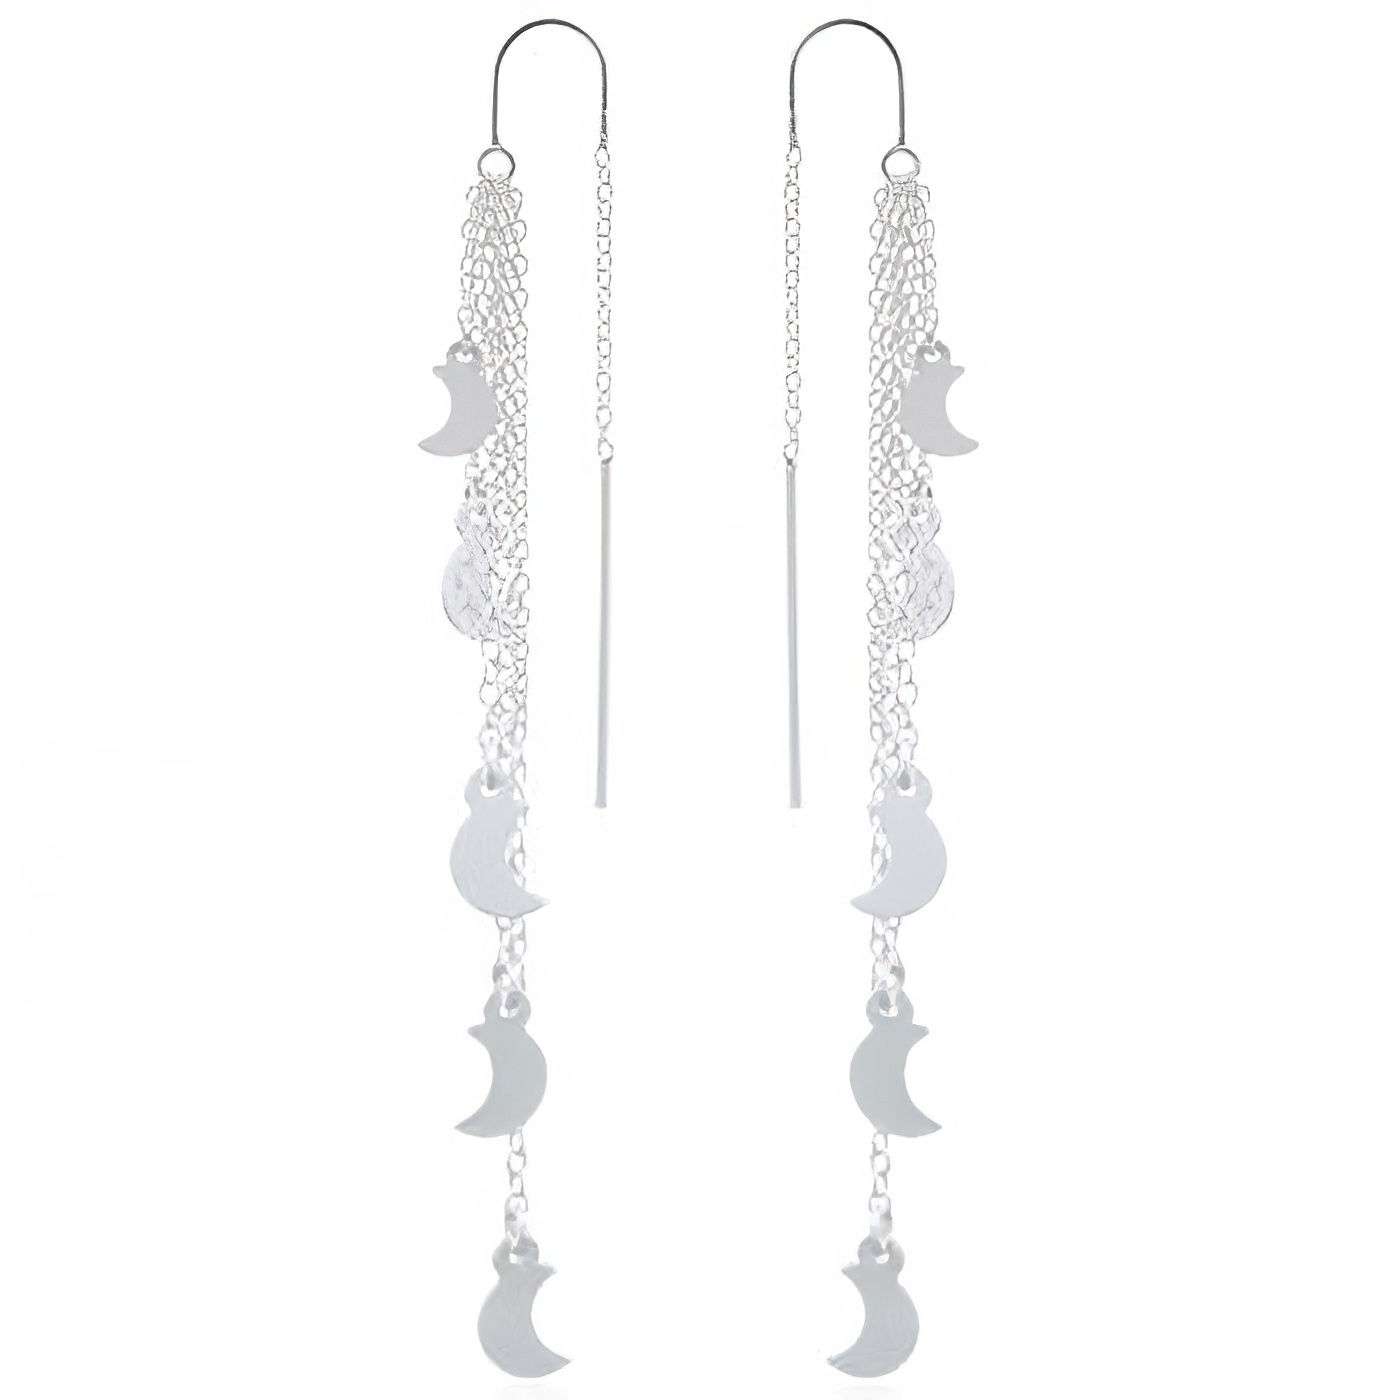 Shinning Moons On Layered Chains Silver Threader Earrings by BeYindi 